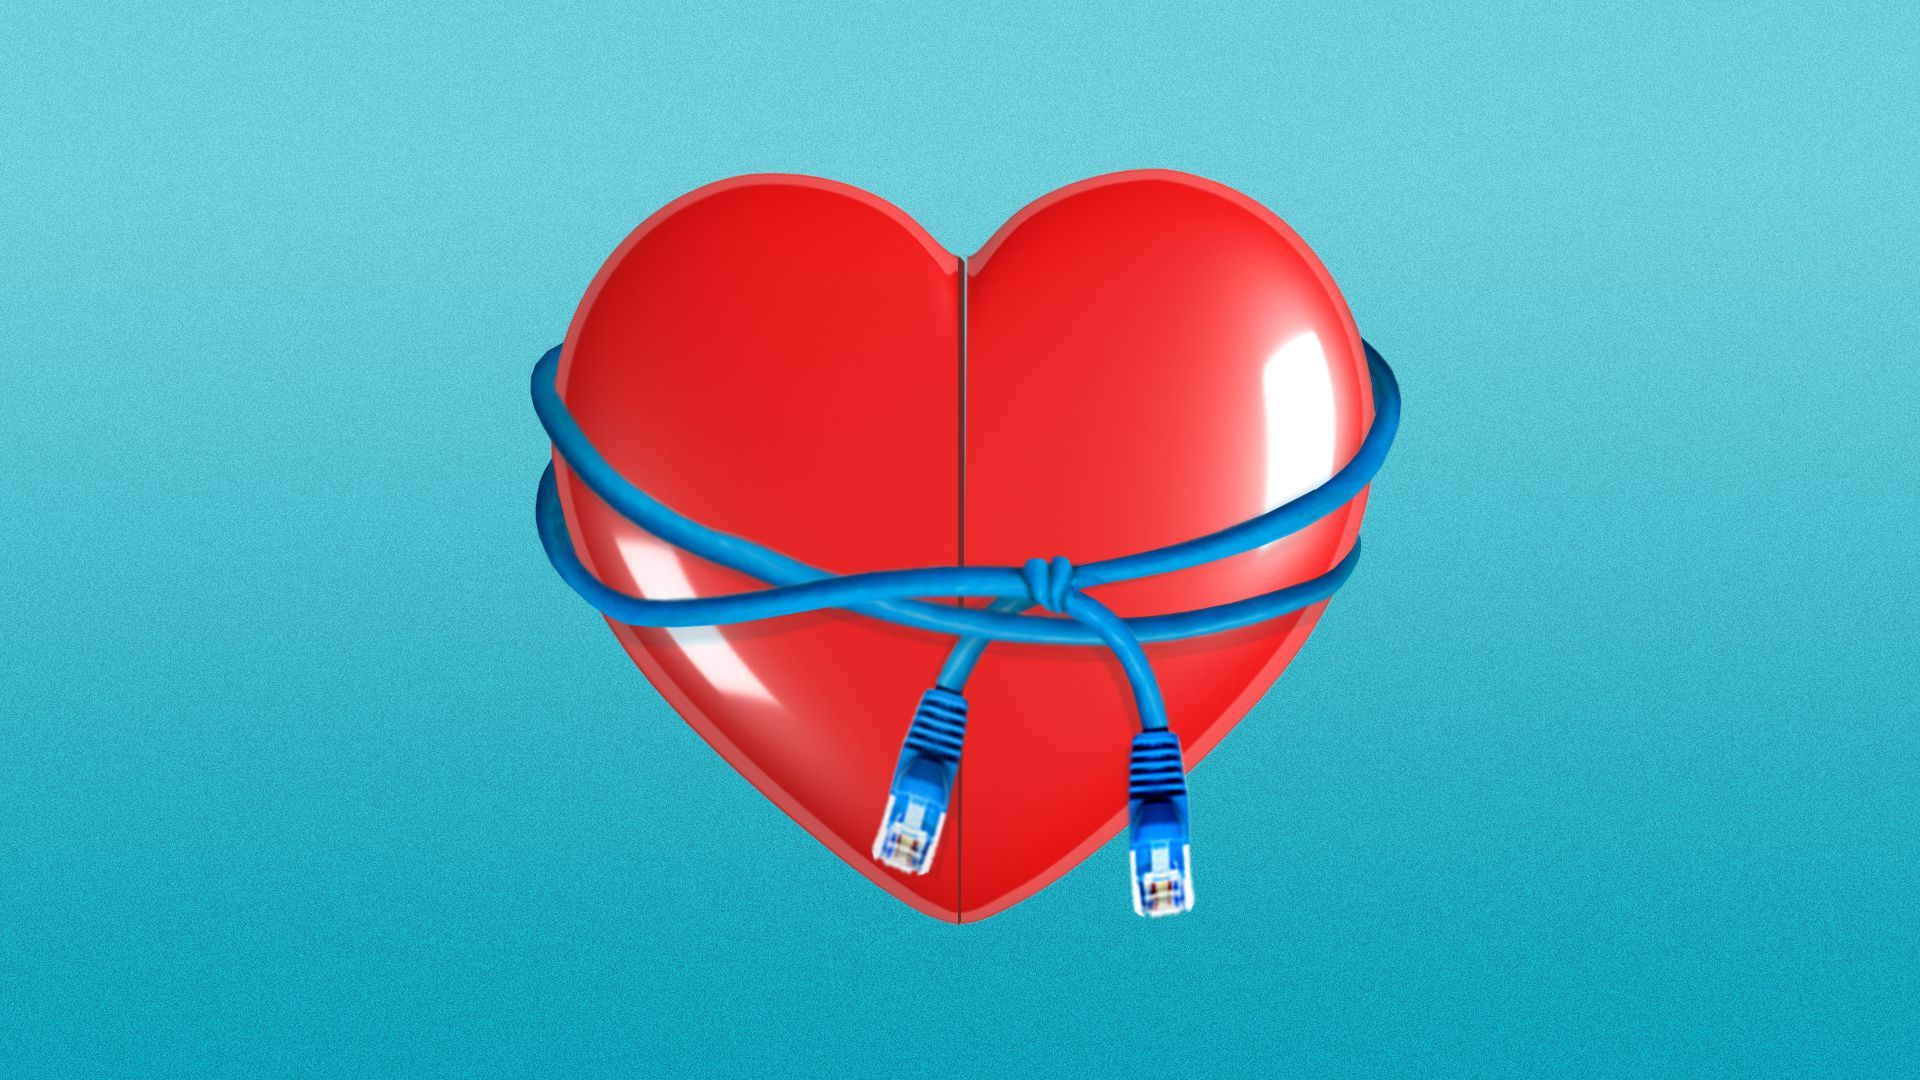 Illustration of a broken heart being held together by an ethernet cord